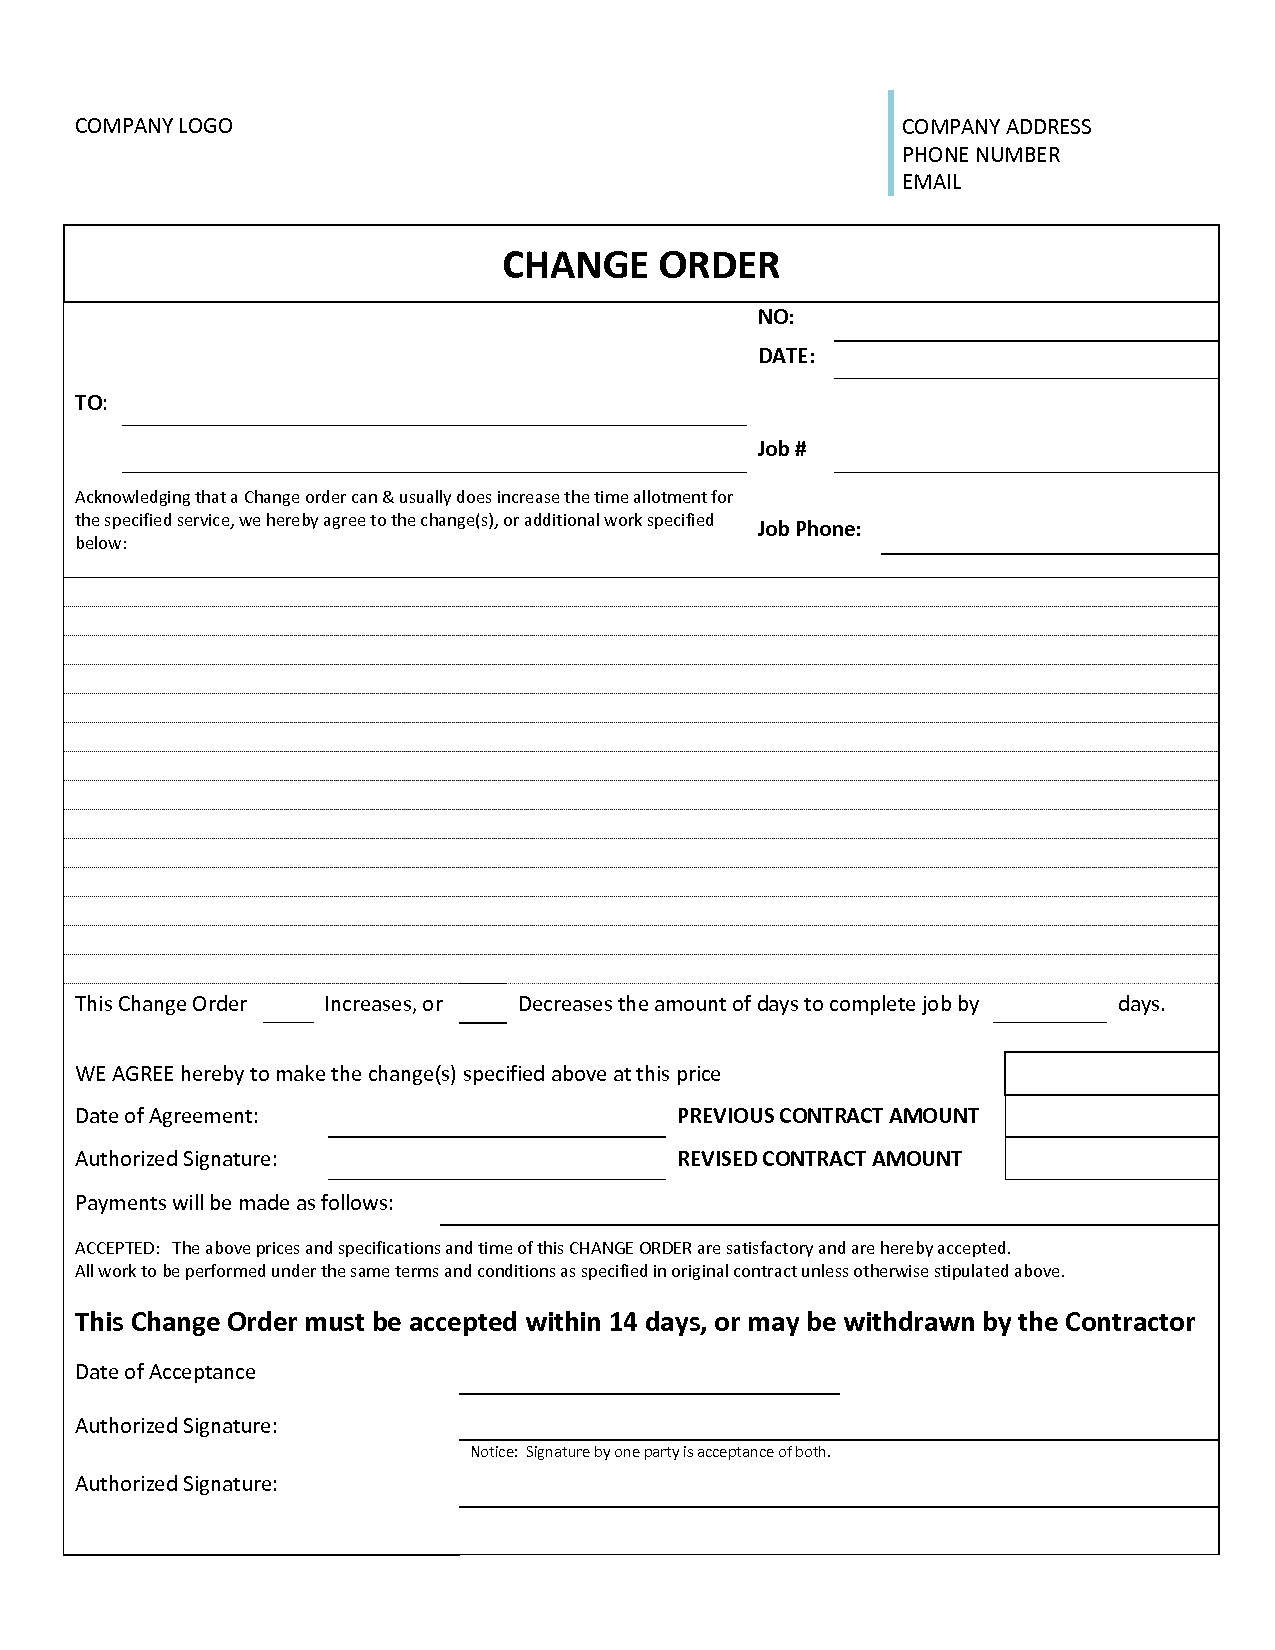 Change Order Form Template | Harley Special - Change Order Form - Free Printable Construction Contracts